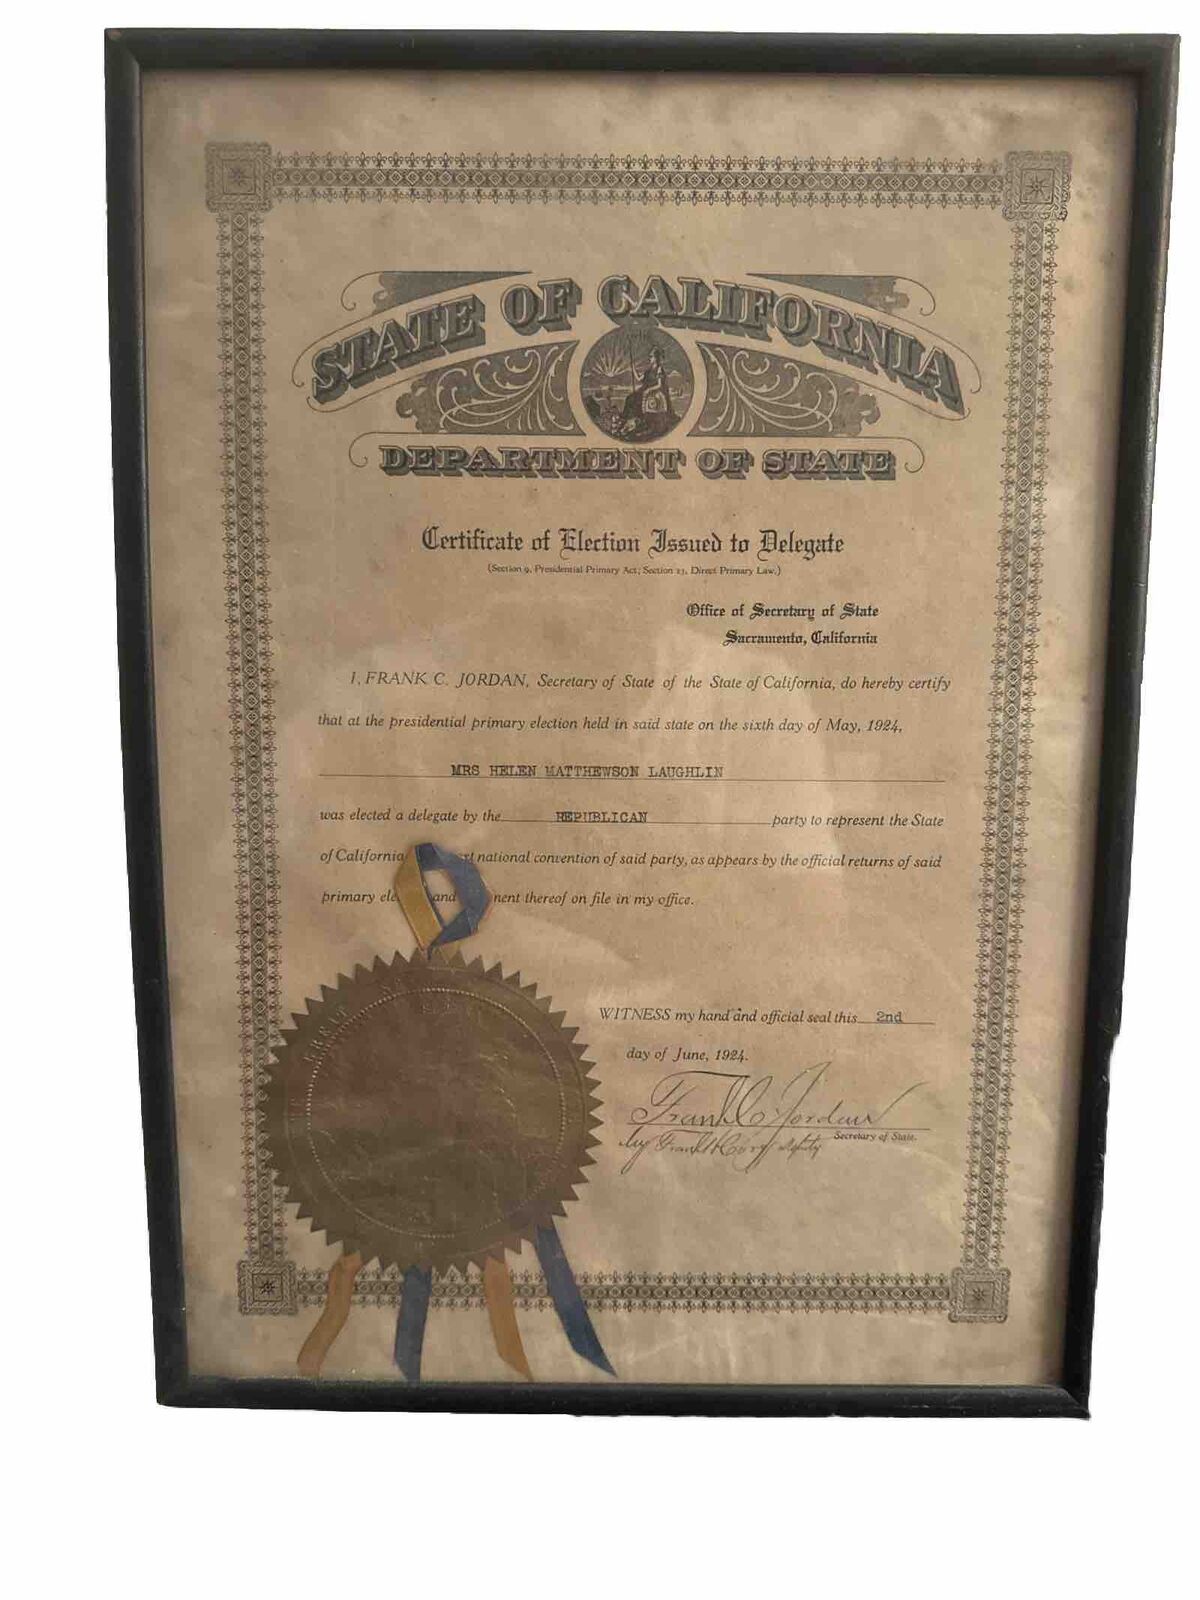 1924 Certificate of Election Issued to Delegate for Presidential Primary Signed